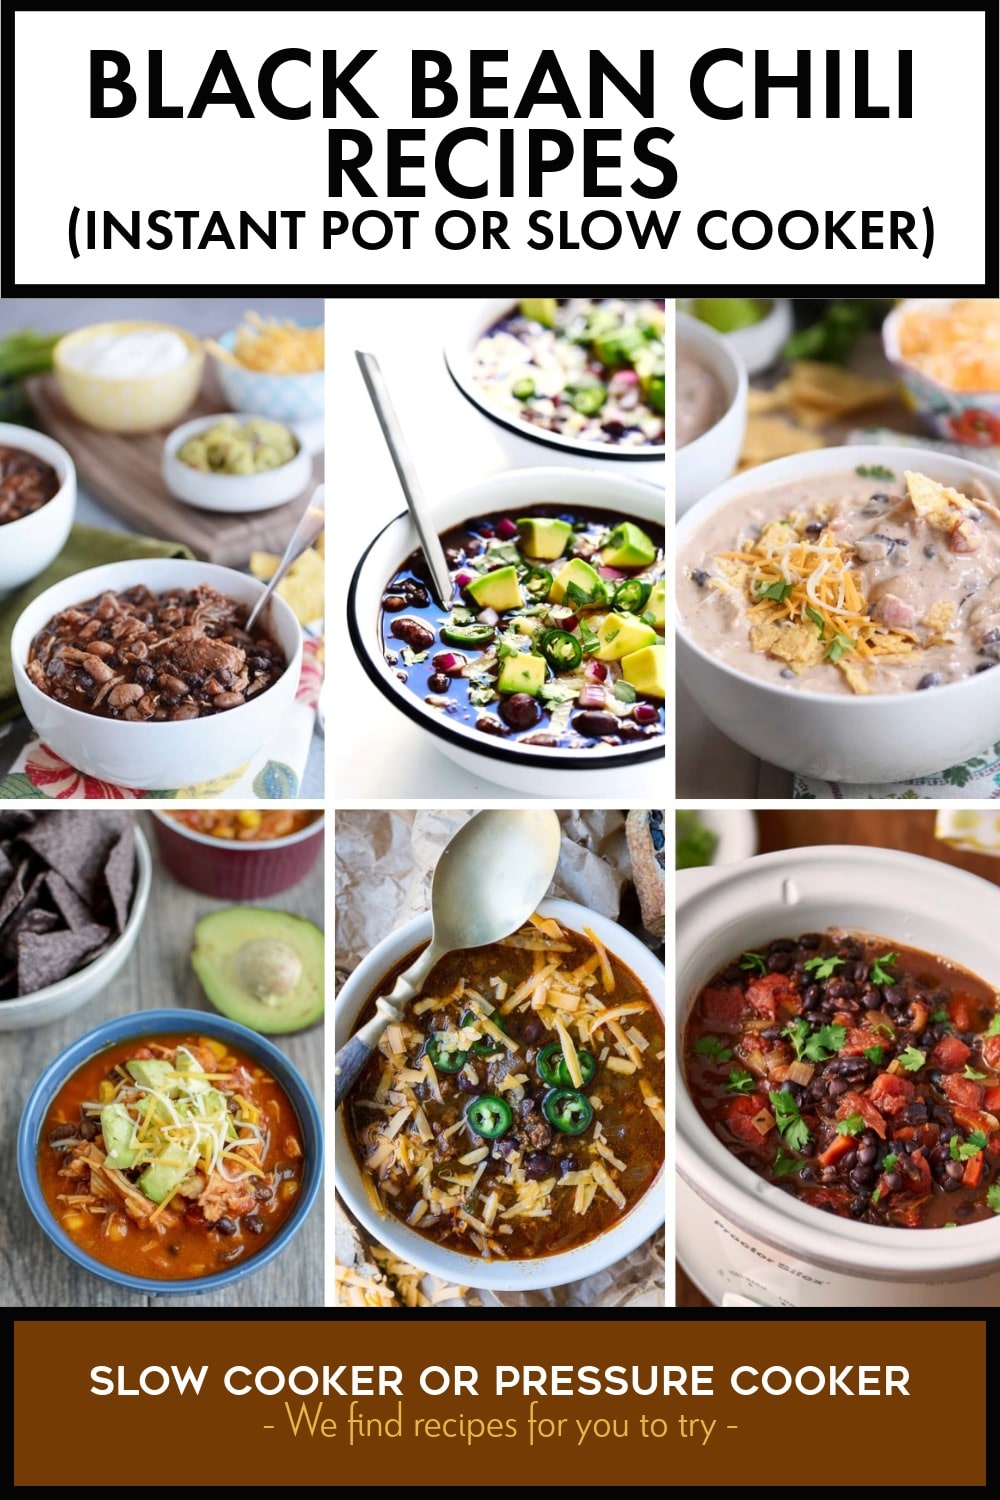 Pinterest image of Black Bean Chili Recipes (Instant Pot or Slow Cooker)